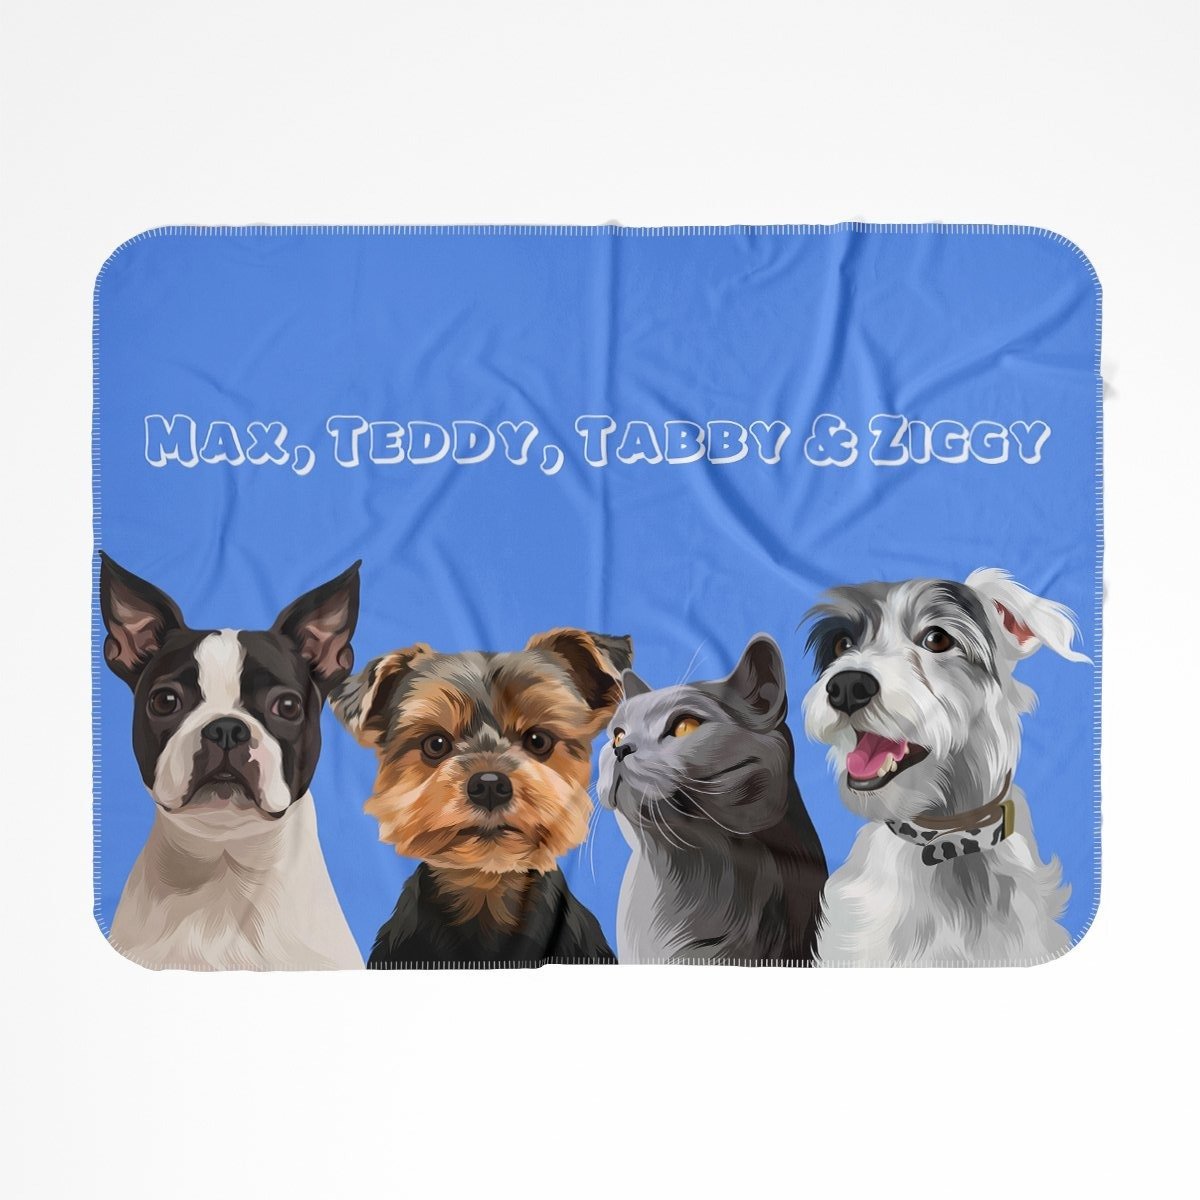 Print Your Digital 4 Pet Portrait On A Blanket - Paw & Glory - #pet portraits# - #dog portraits# - #pet portraits uk#Pawandglory, Pet art blanket,blanket with my dogs face on it, blankets with pets on them, picture of dog on blanket, get your dog on a blanket, blanket of pet